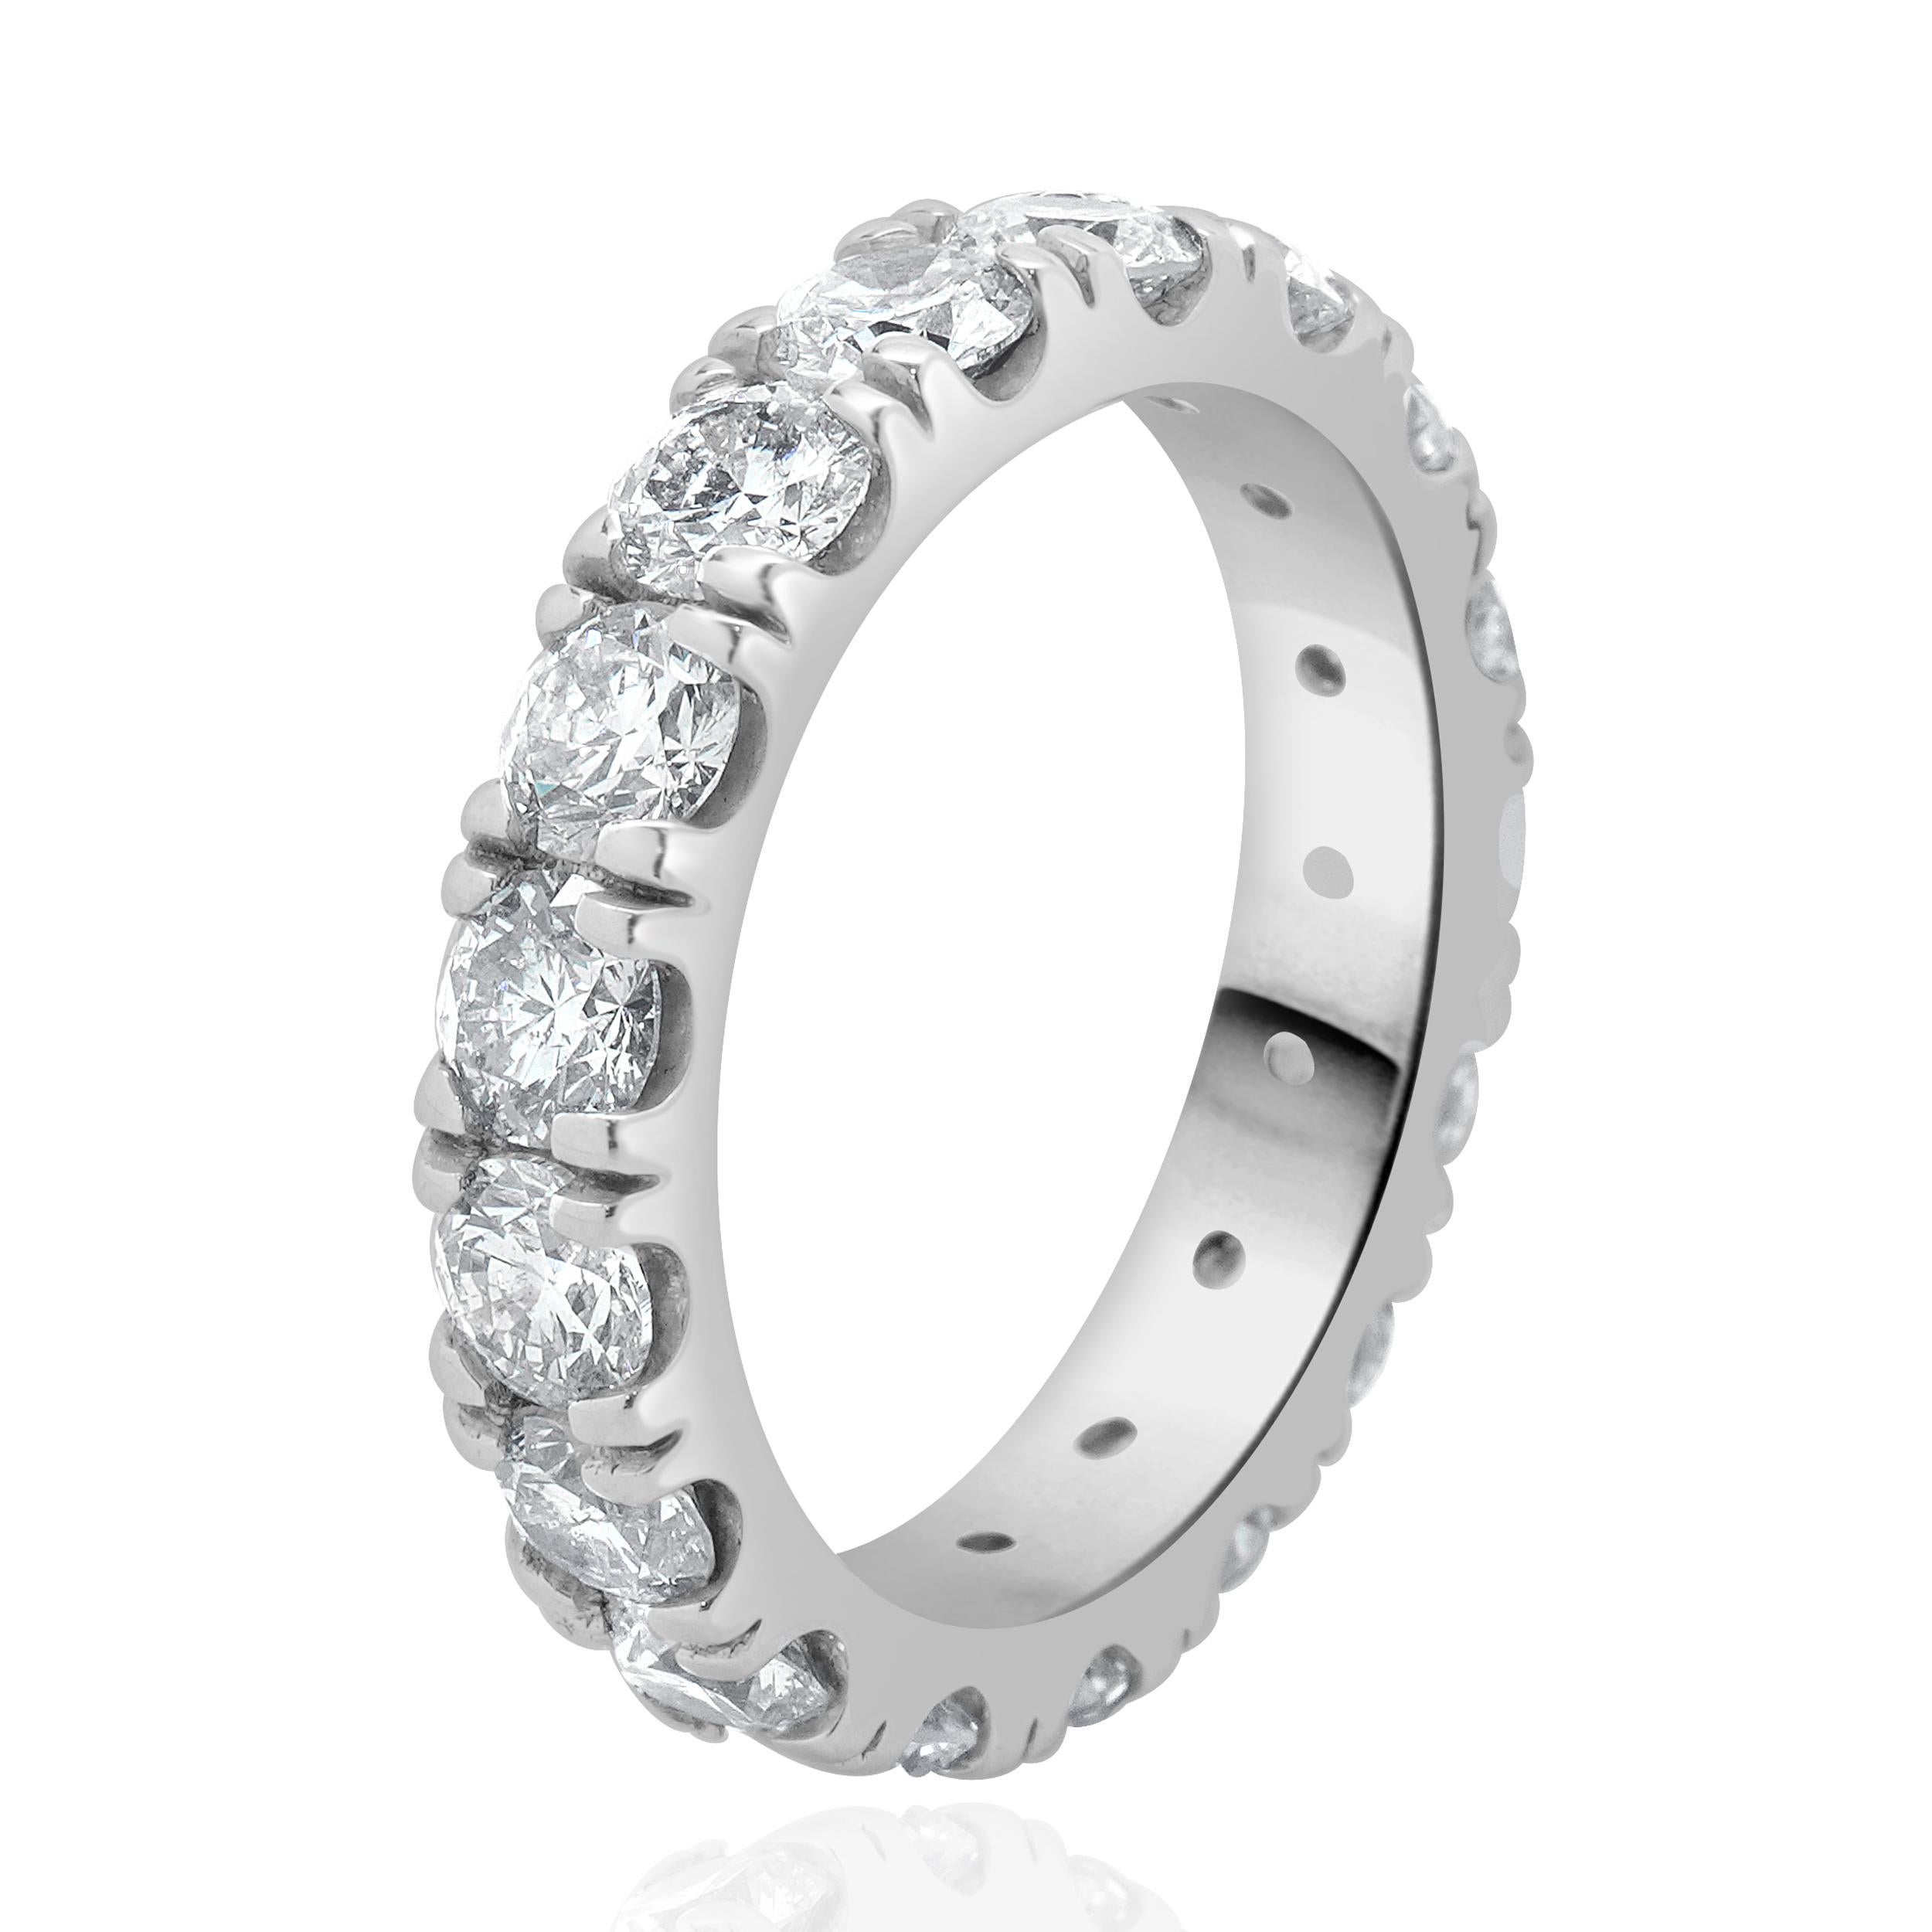 Designer: custom
Material: 14K white gold
Diamond: 17 round brilliant cut = 3.12cttw
Color: G
Clarity: VS
Ring size: 6 (please allow two additional shipping days for sizing requests)
Weight: 3.79 grams
